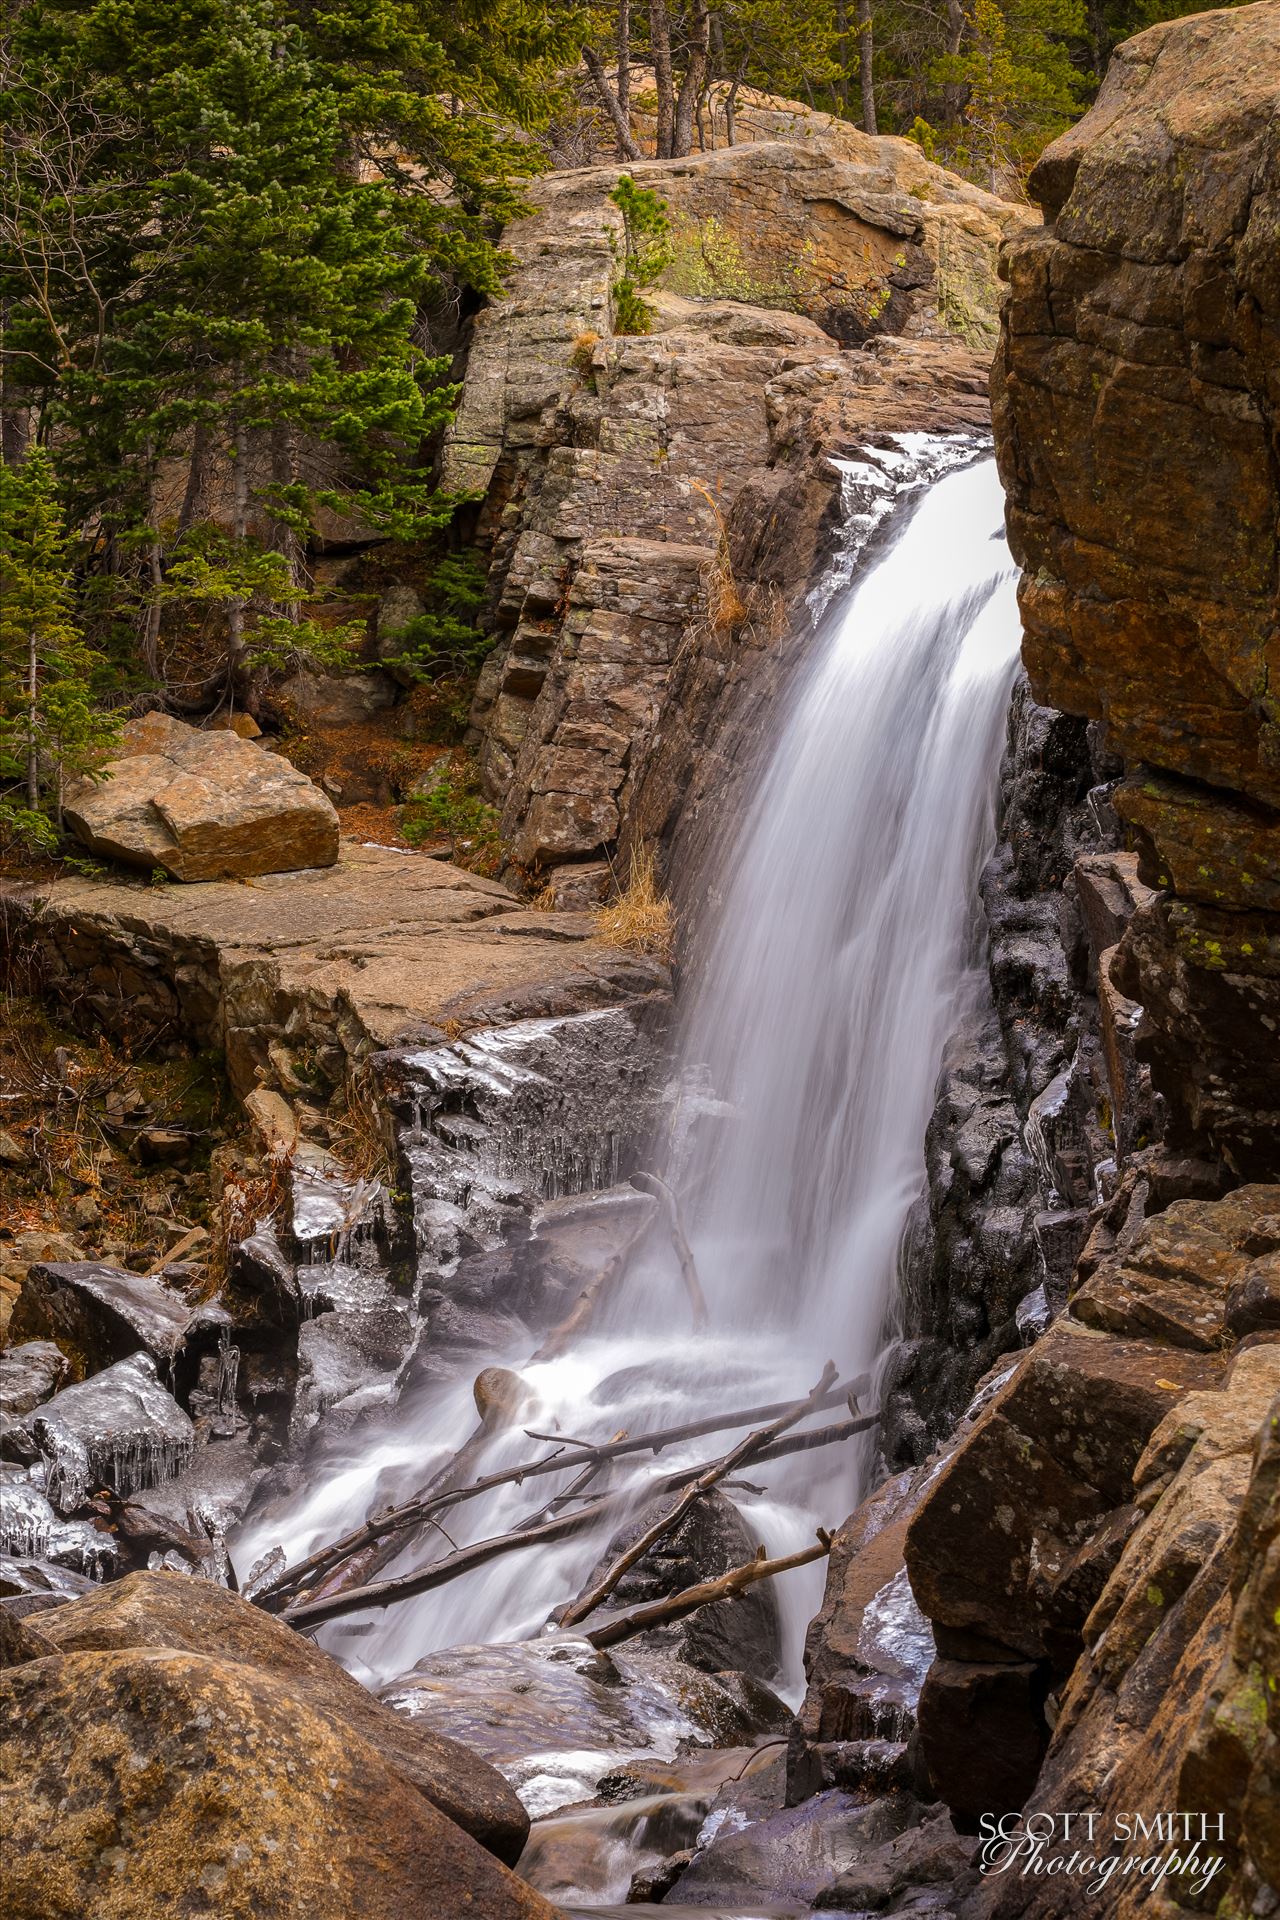 Alberta Falls, Rocky Mountain National Park No 4 - As winter approaches and the temperature starts to drop, ice formations start to appear around Alberta Falls. by Scott Smith Photos